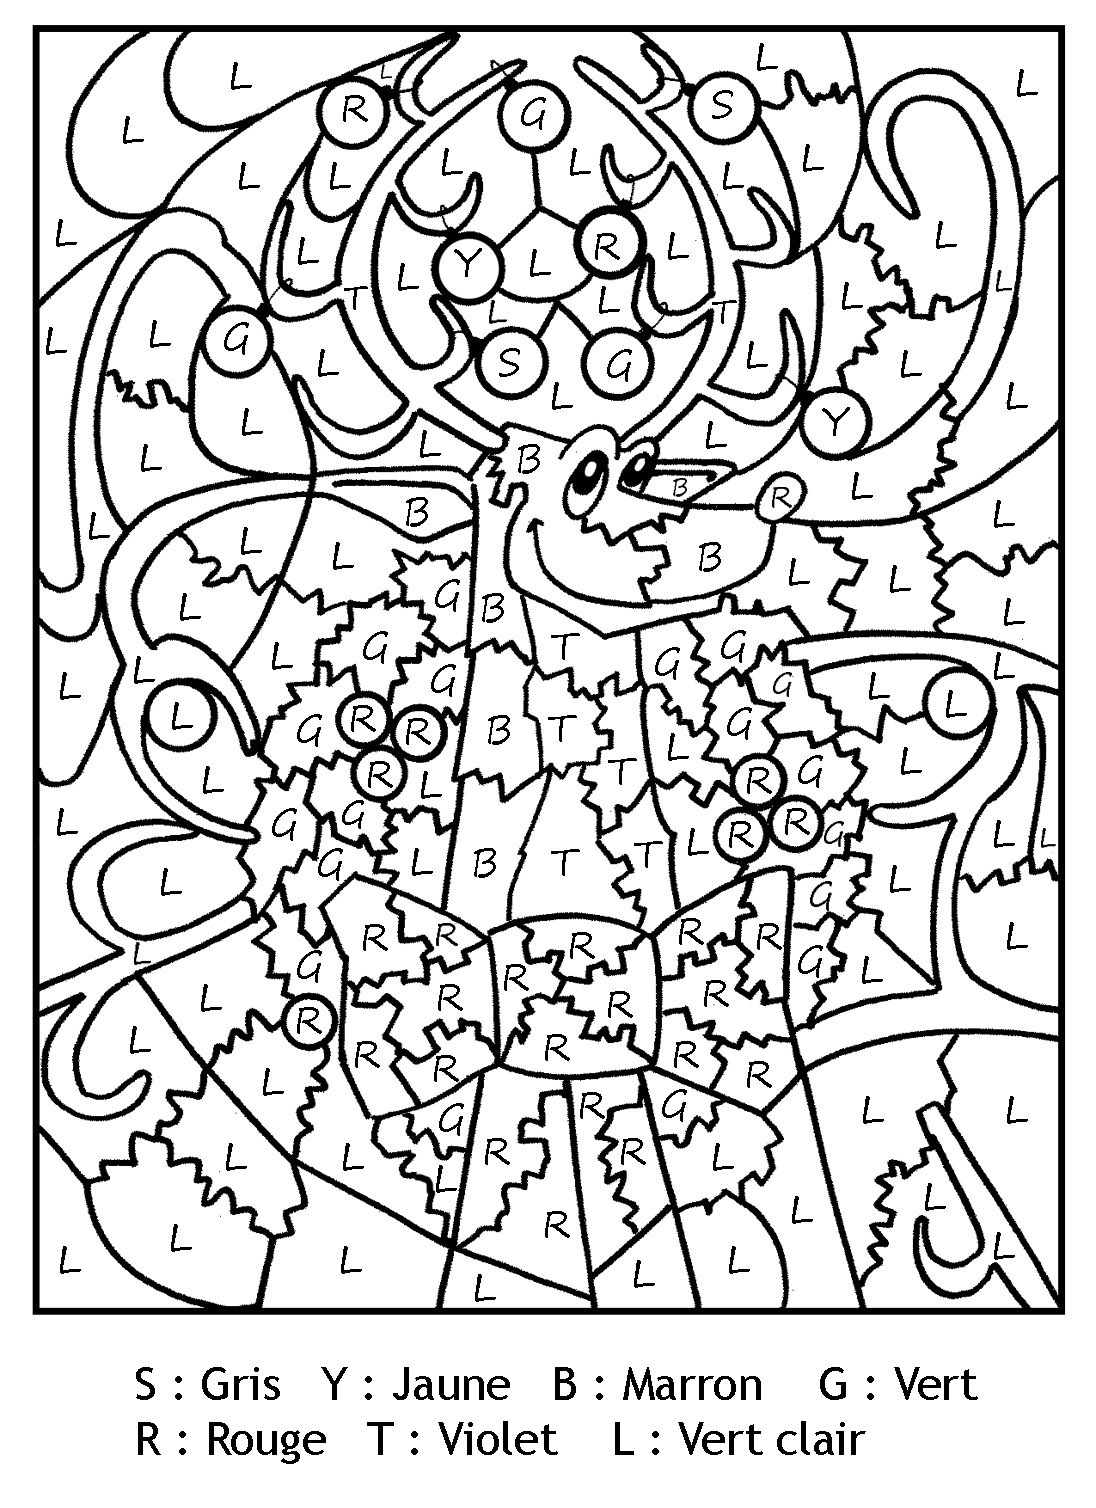 Free Magic Coloring coloring page to download : reindeer